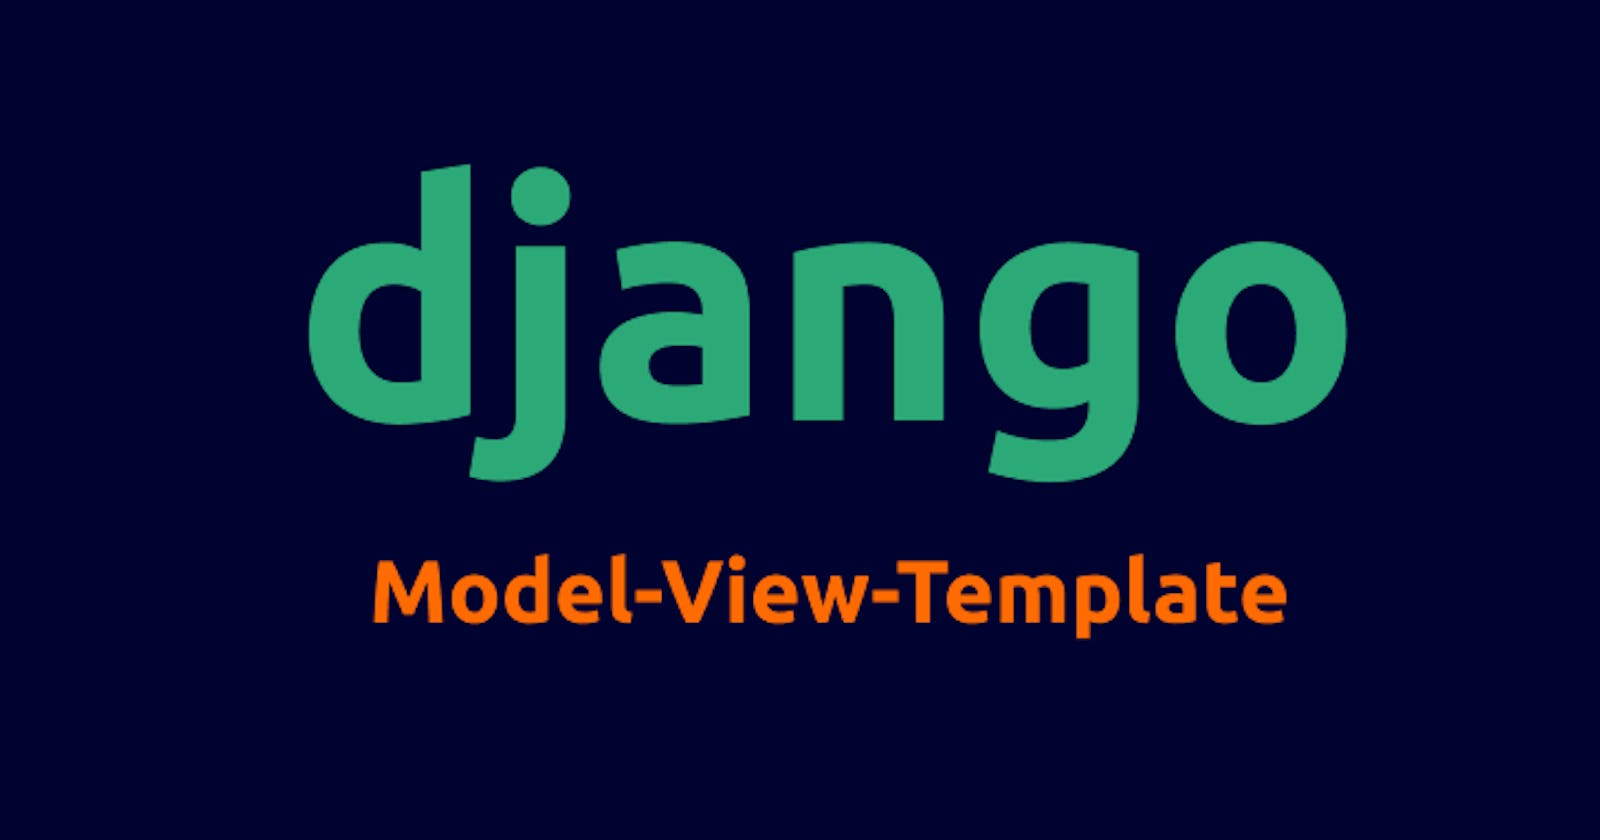 Django MVT: An Introduction to the Model-View-Template Architecture of a Django App